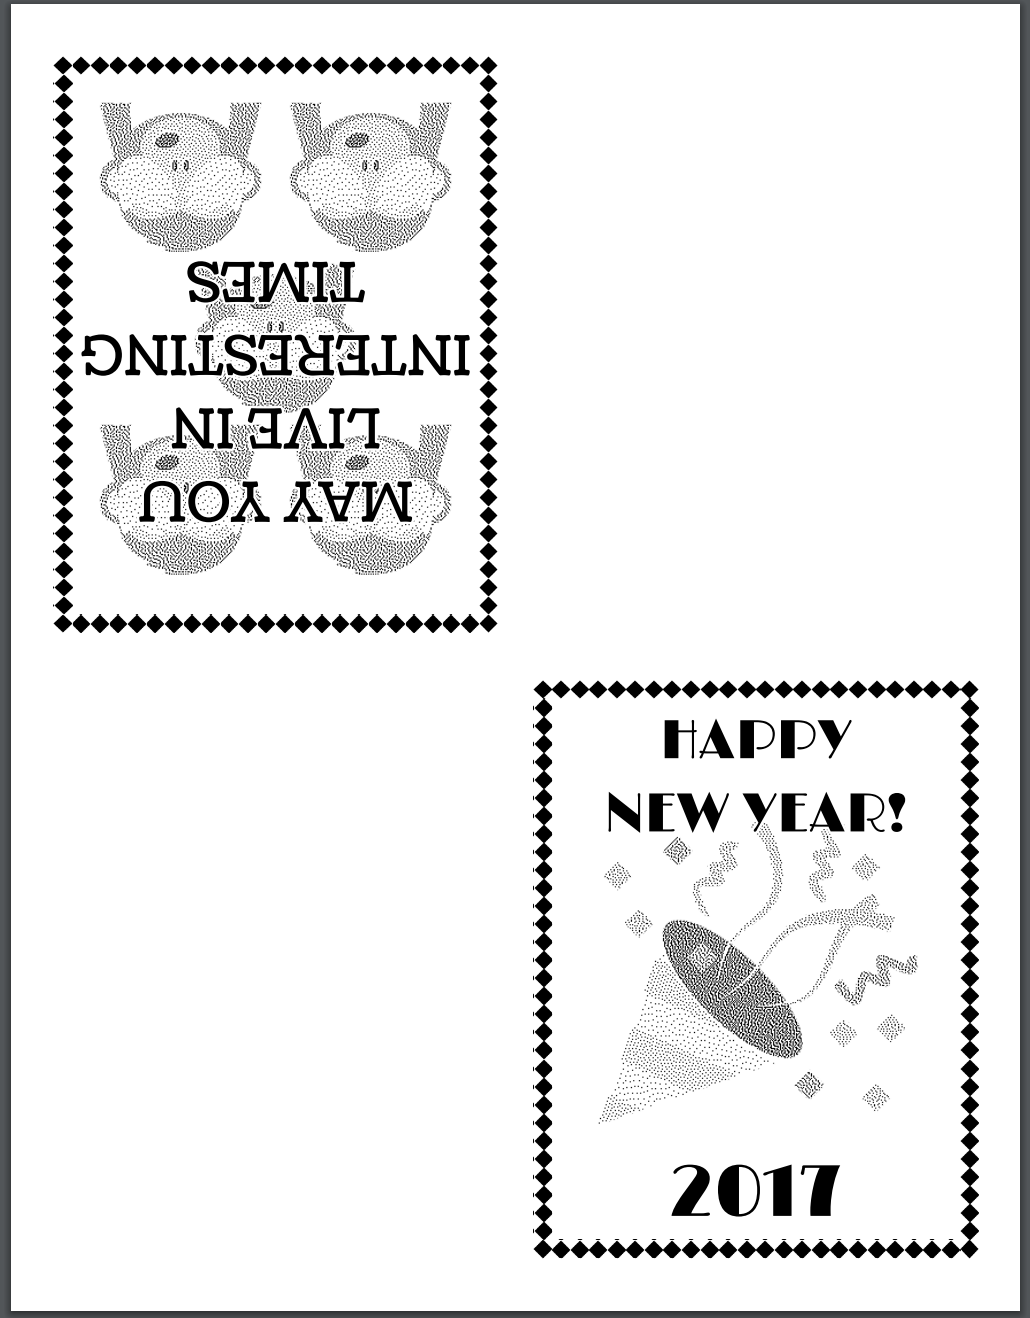 Print Preview of new years card